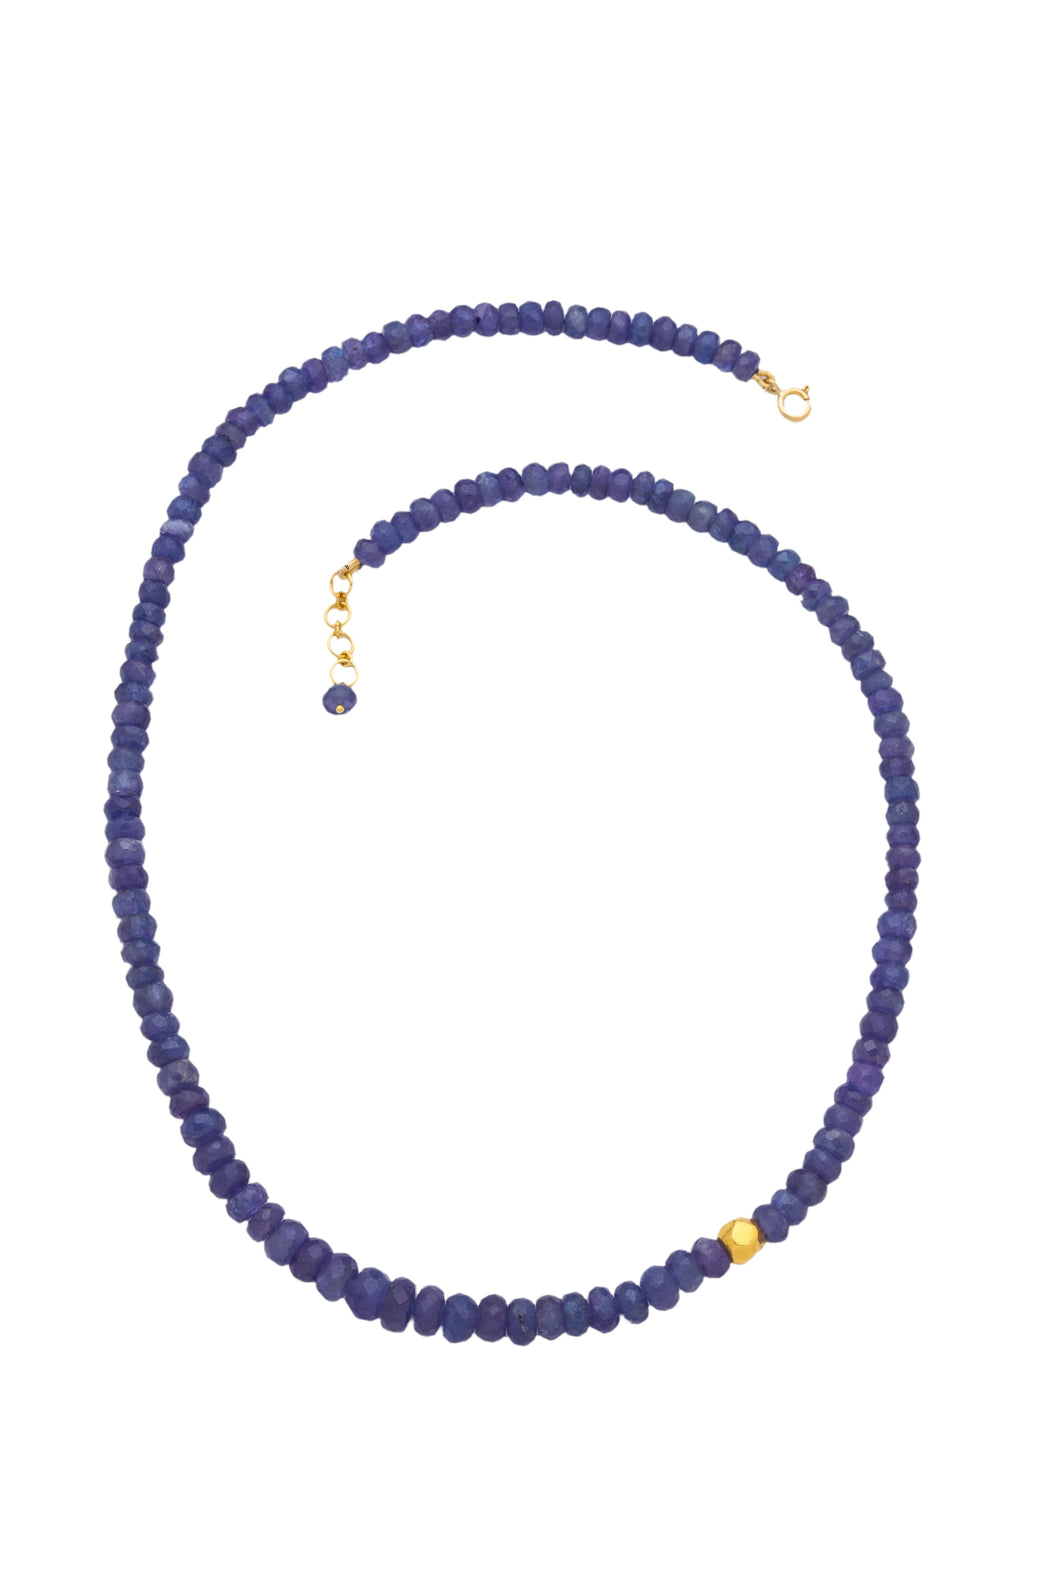 Tanzanite Beaded Faceted Gemstone 18kt Gold Necklace N002-T